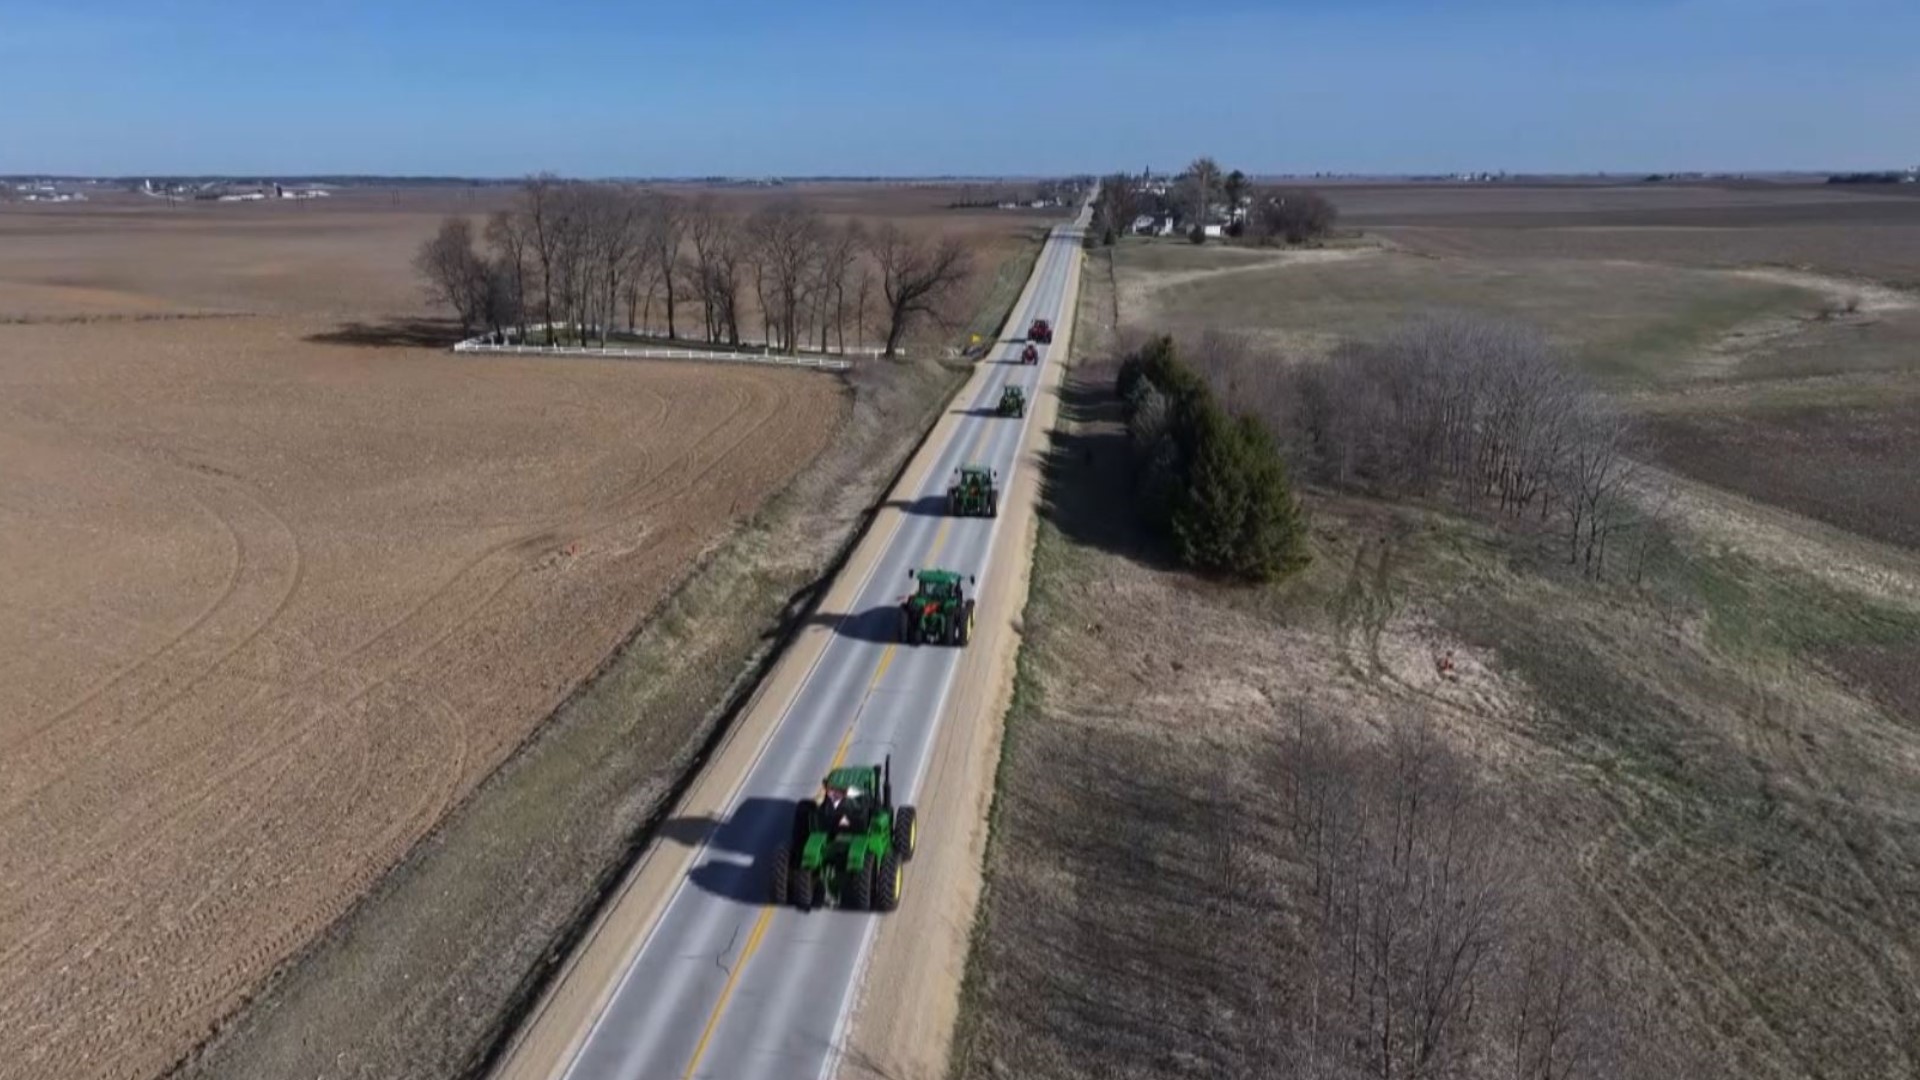 Members drove their tractors to school to educate their classmates on farming before a tractor parade rolled over to John Glenn Elementary for more learning.